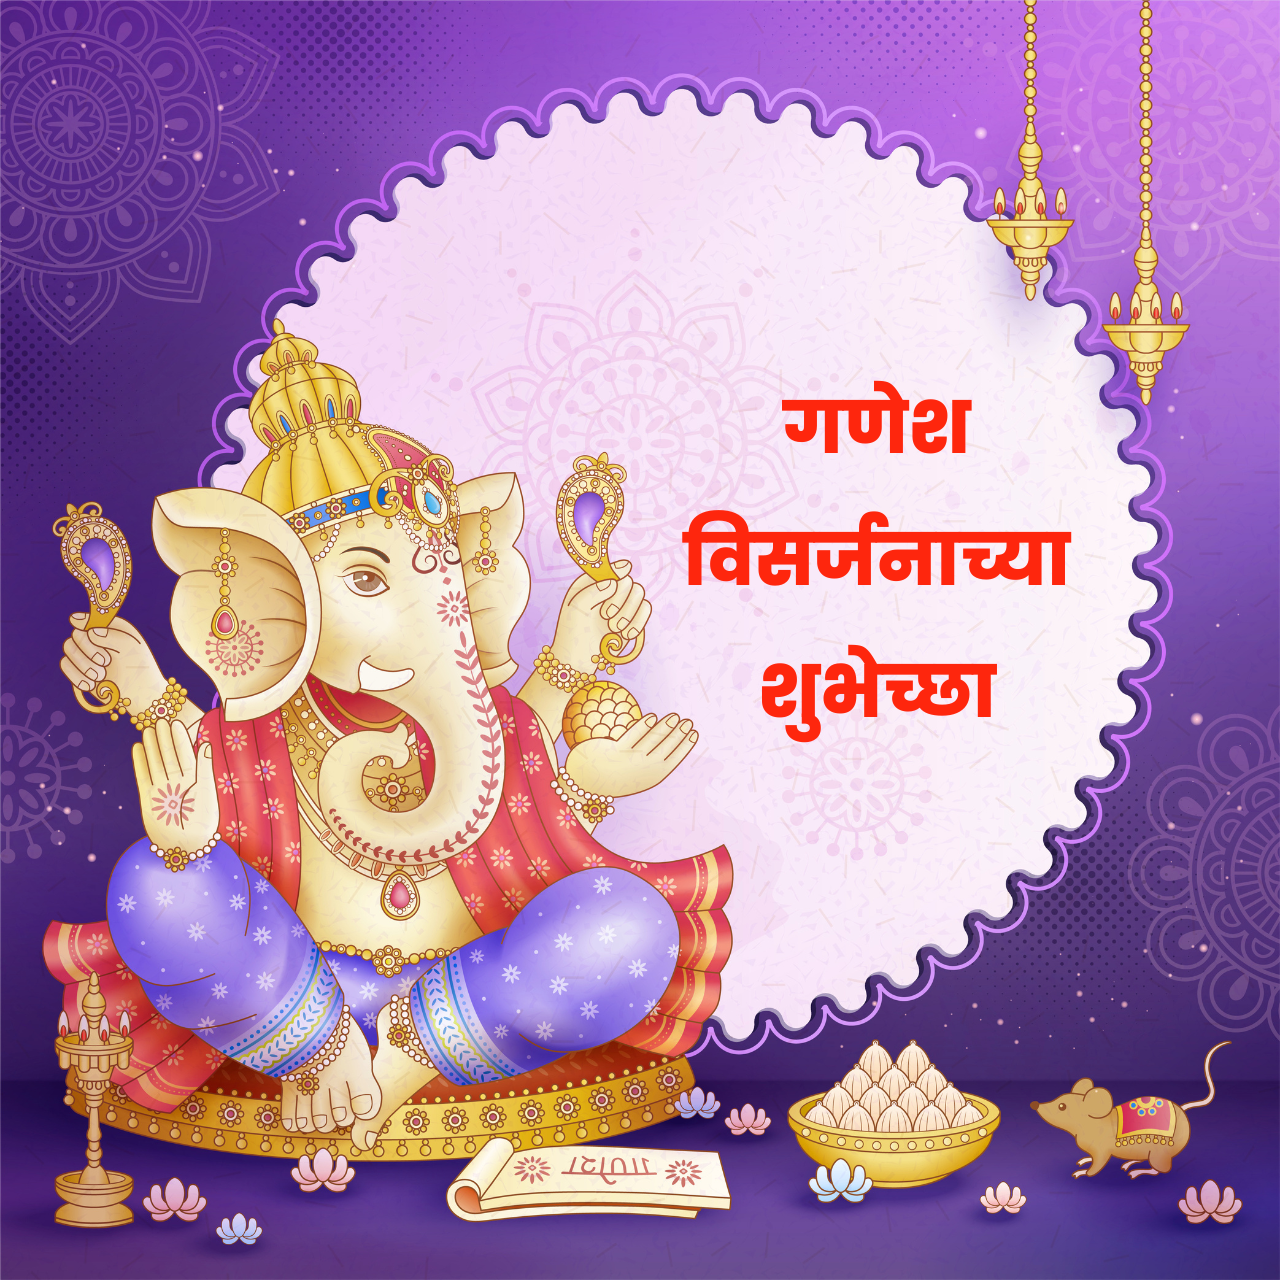 Ganesh Visarjan 2022: Marathi Quotes, Images, Wishes, Greetings, Messages, Posters, and Banners